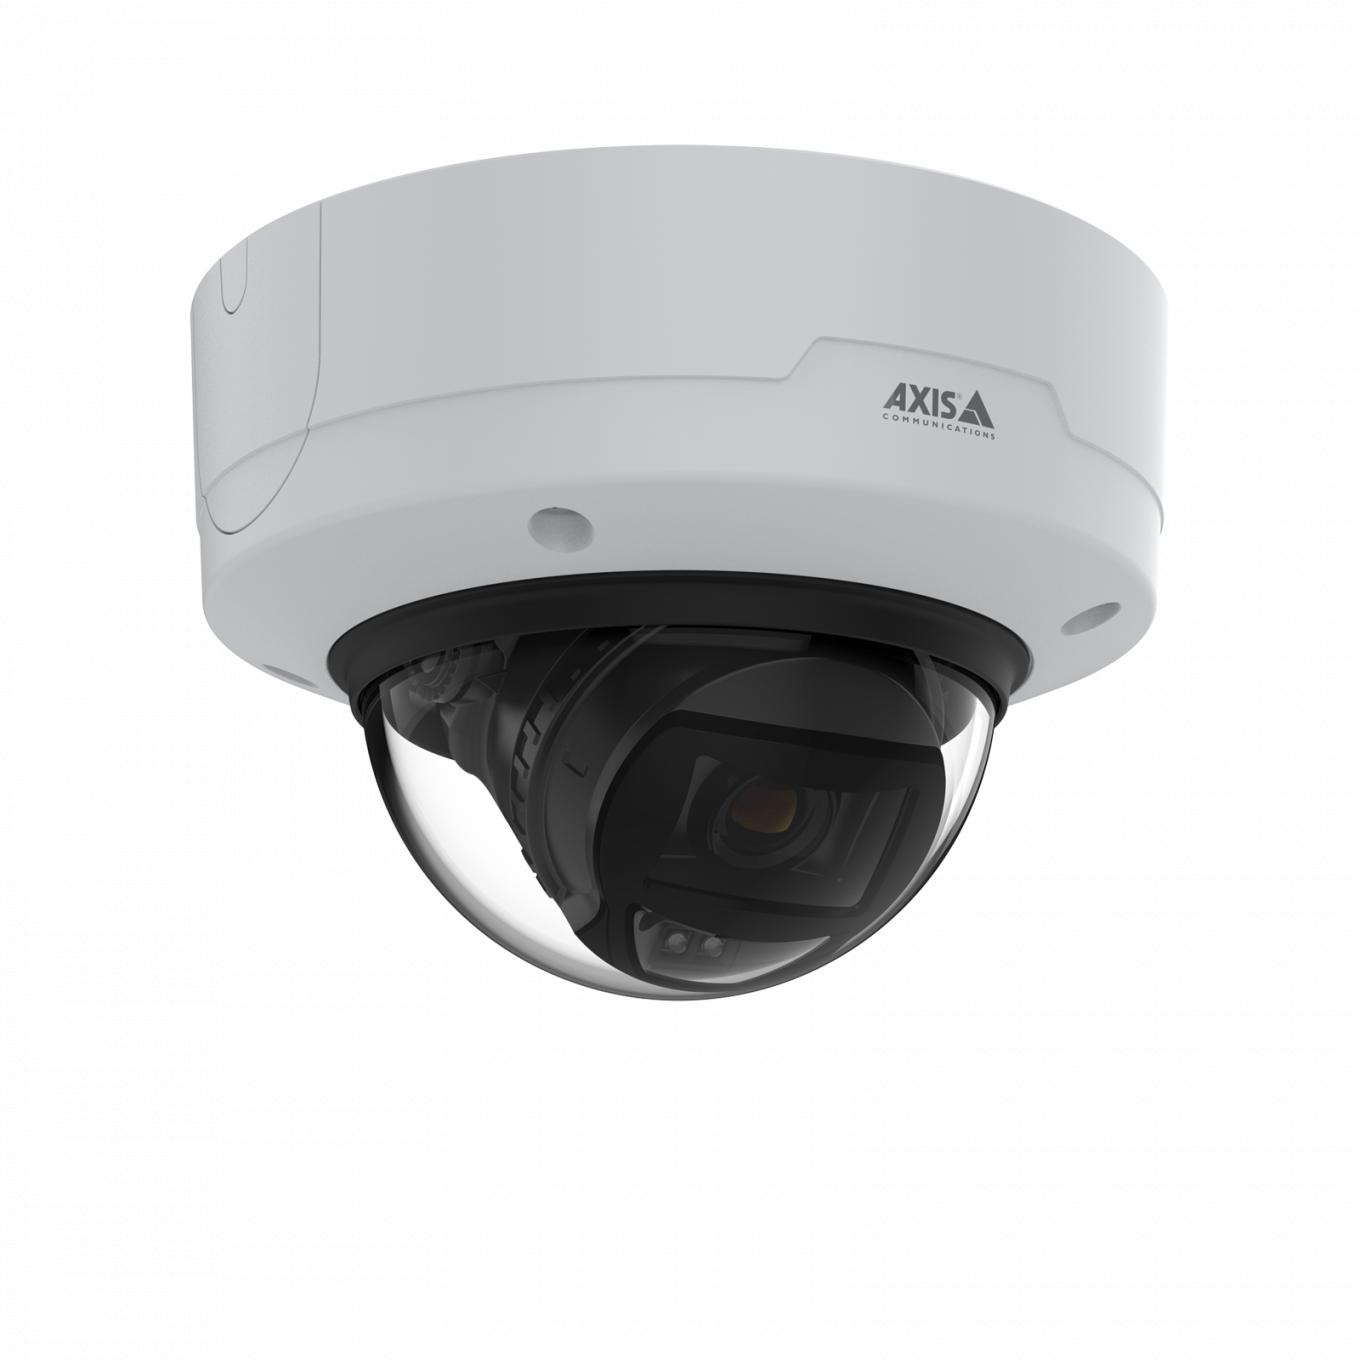 AXIS P3265-LVE Dome Camera mounted in ceiling from right